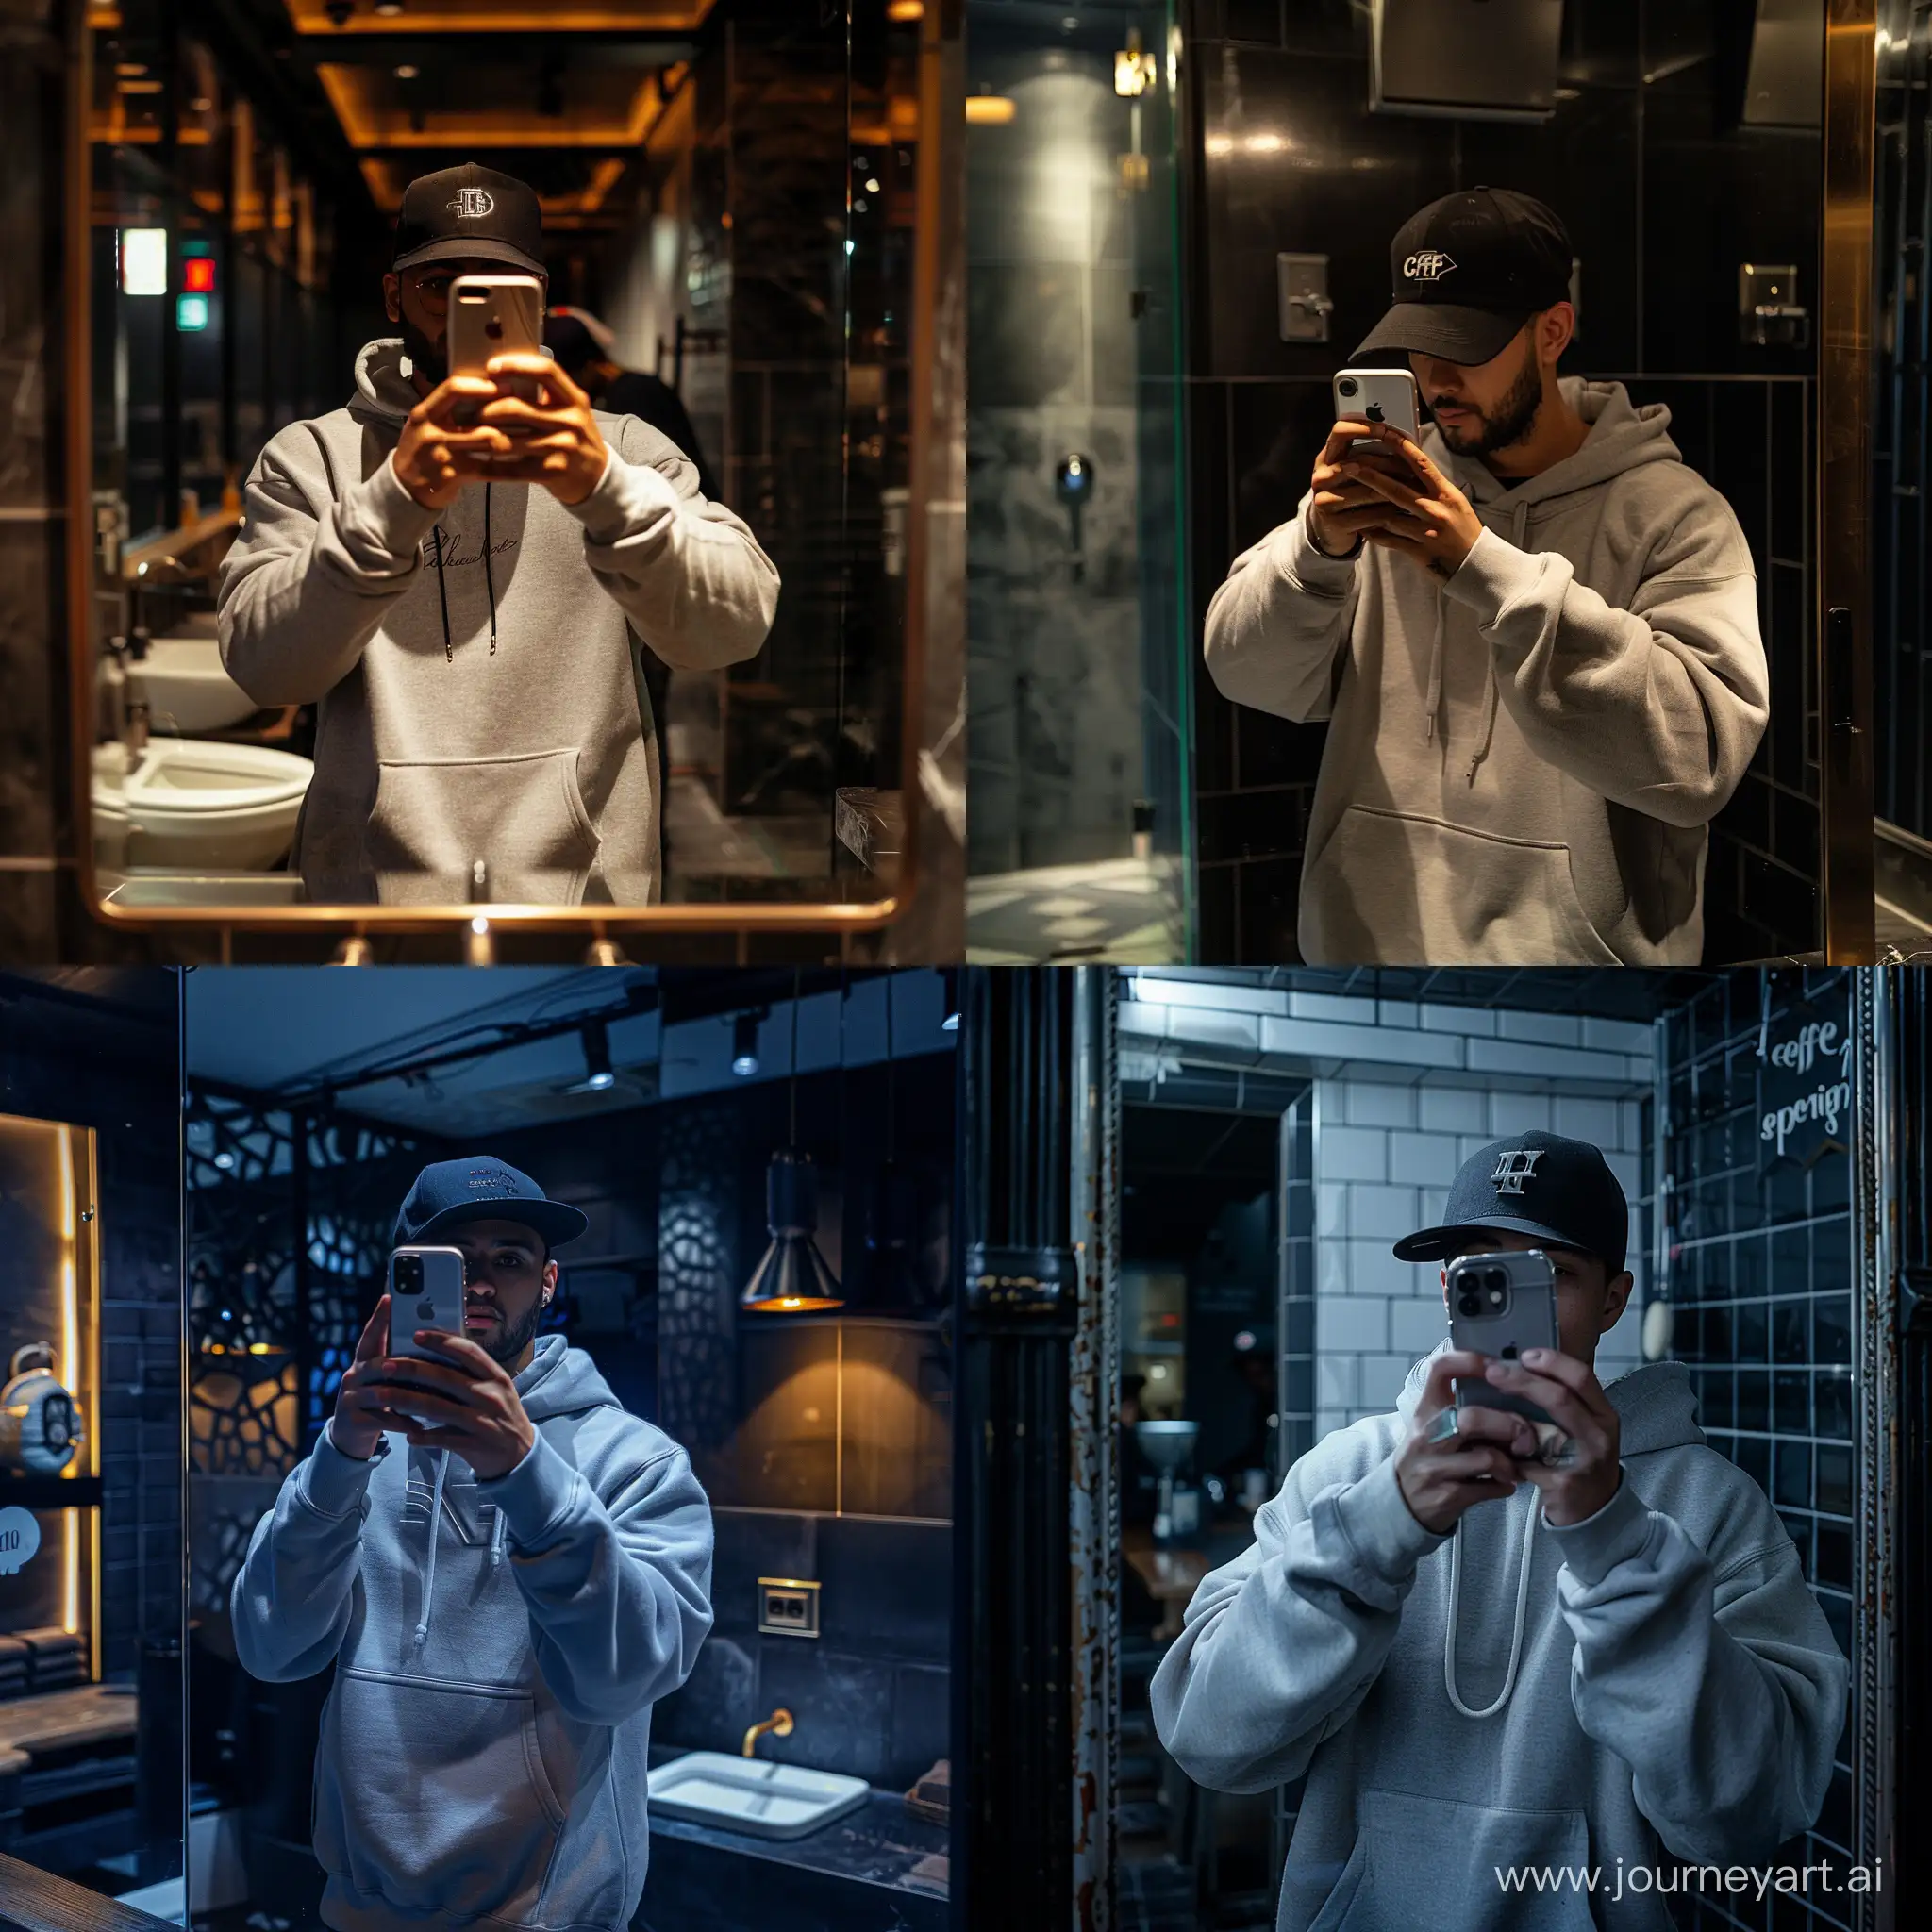 Man taking a mirror selfie, he has an iPhone 11 in hand, he is wearing oversized grey hoodie, a basic black baseball hat, he is in a high-end cafe bathroom, the bathroom is dark-themed